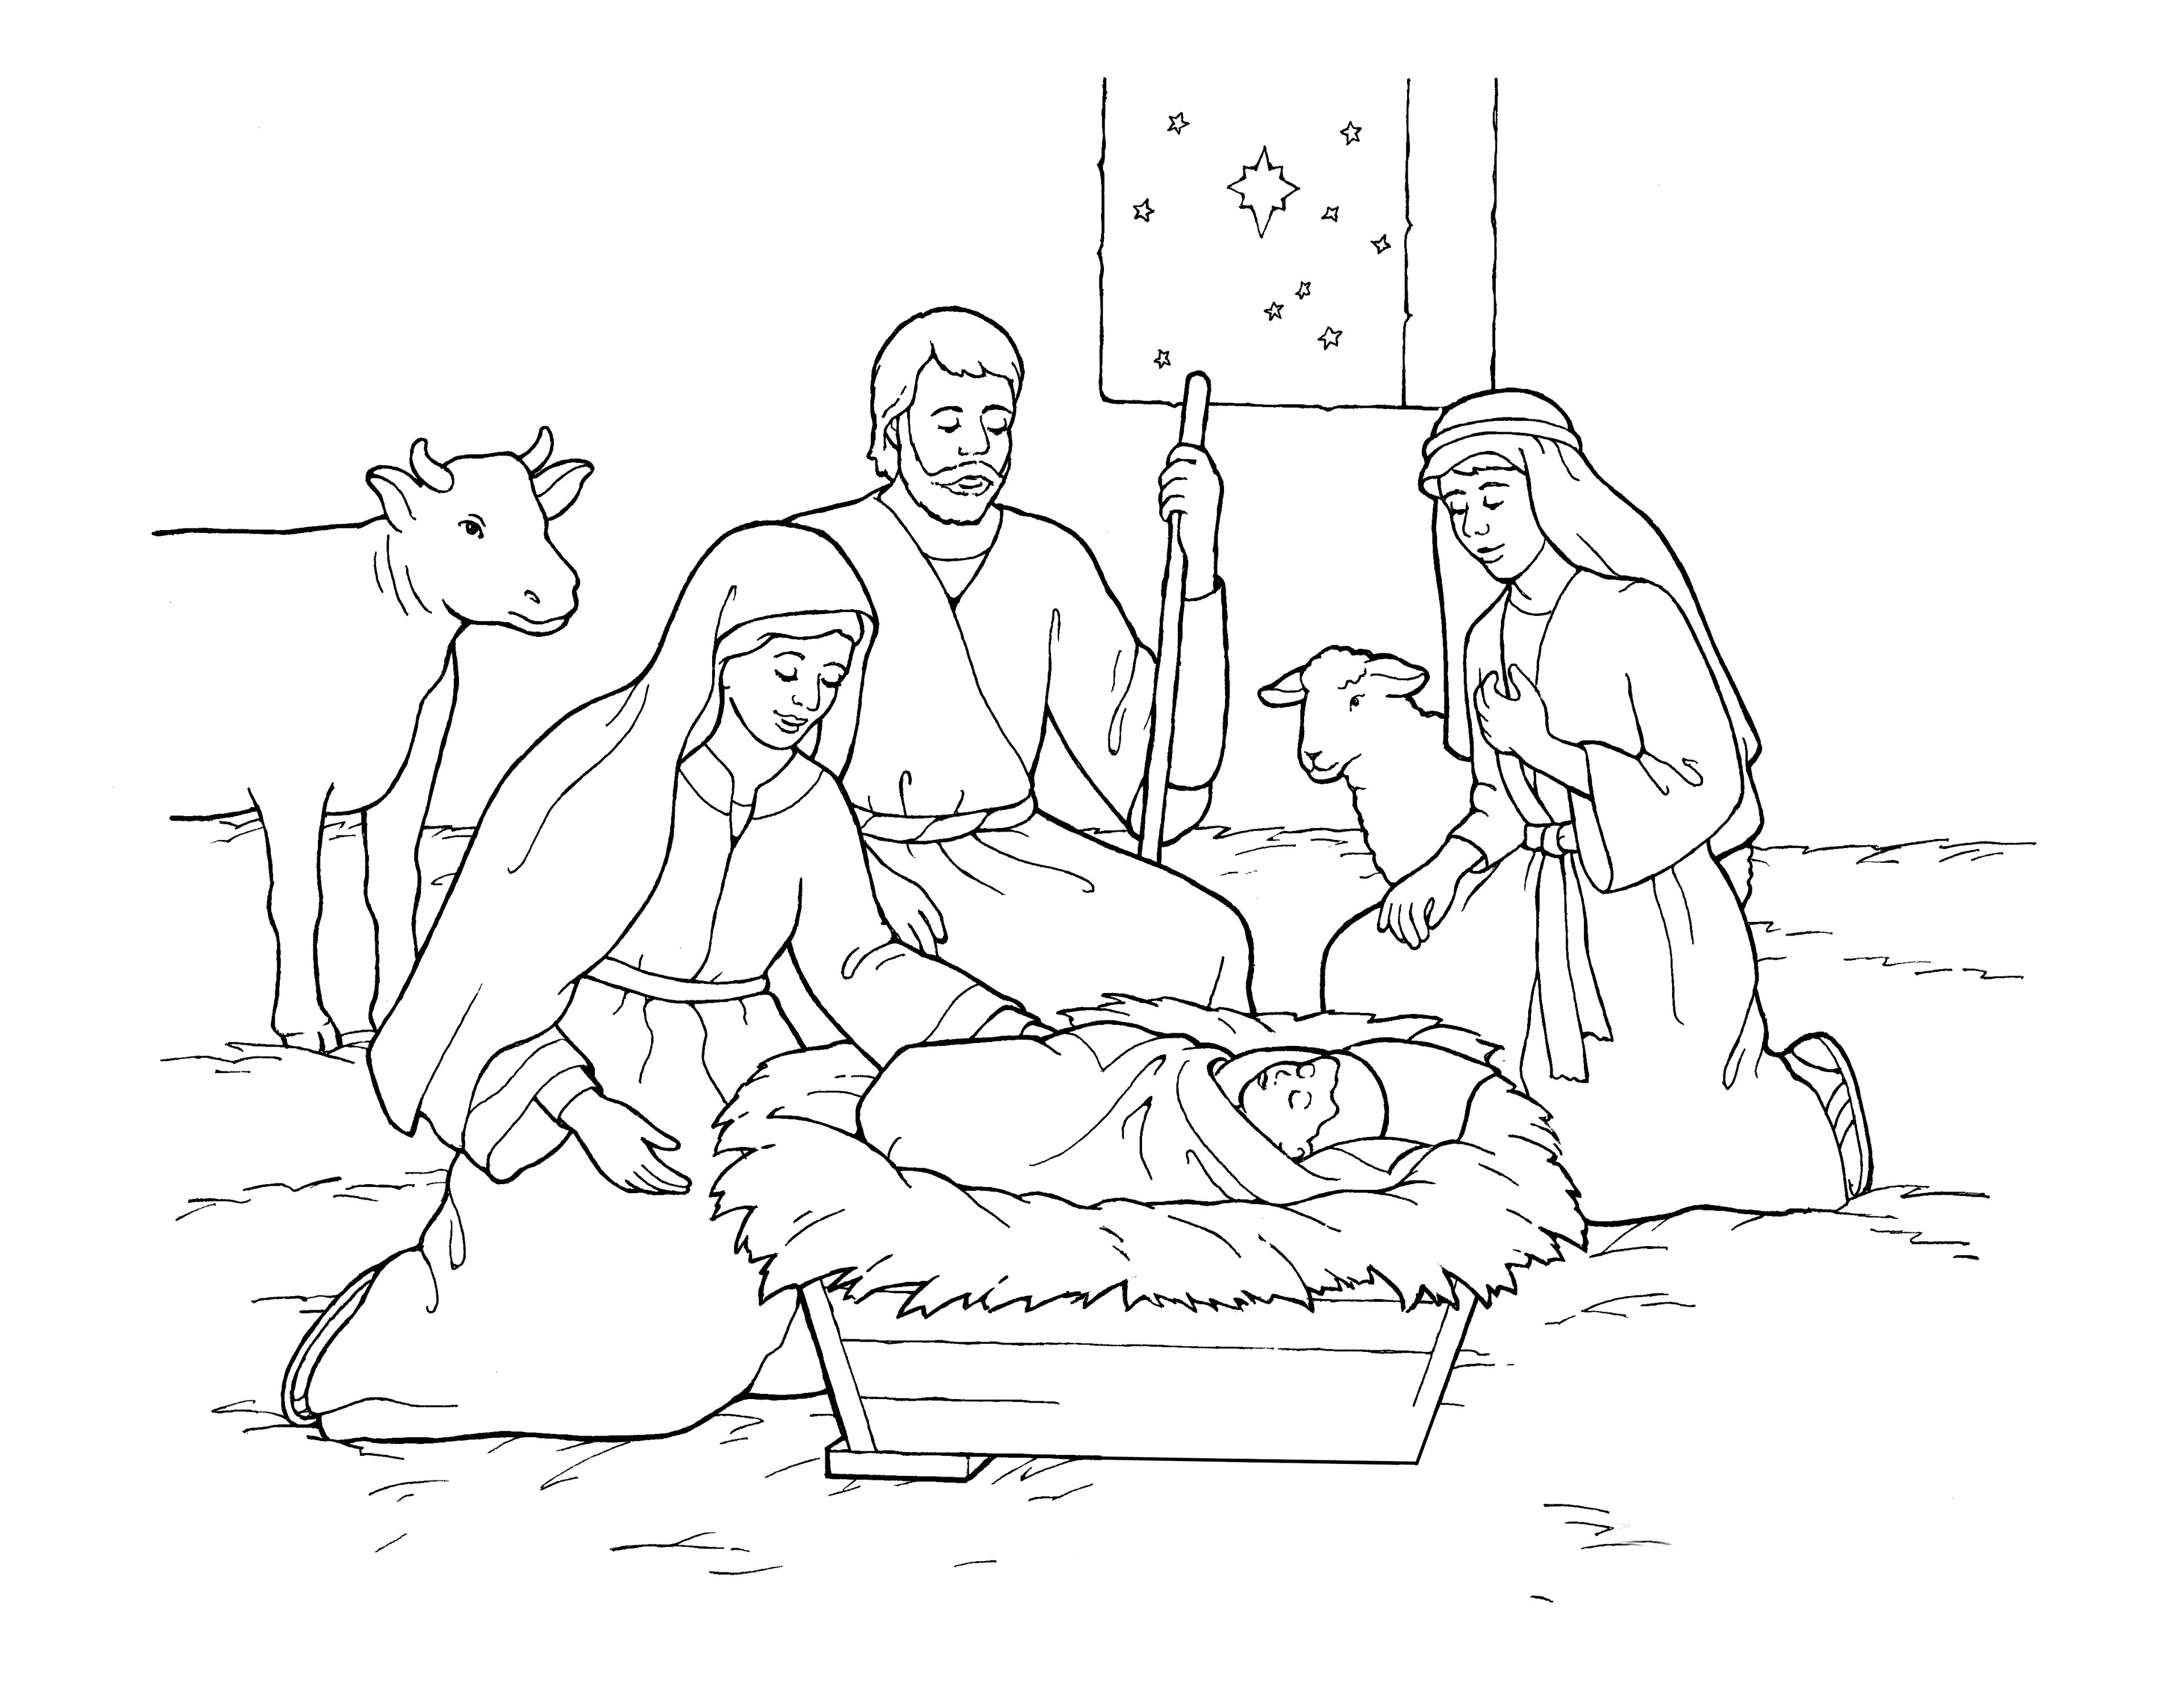 An illustration of the Nativity.